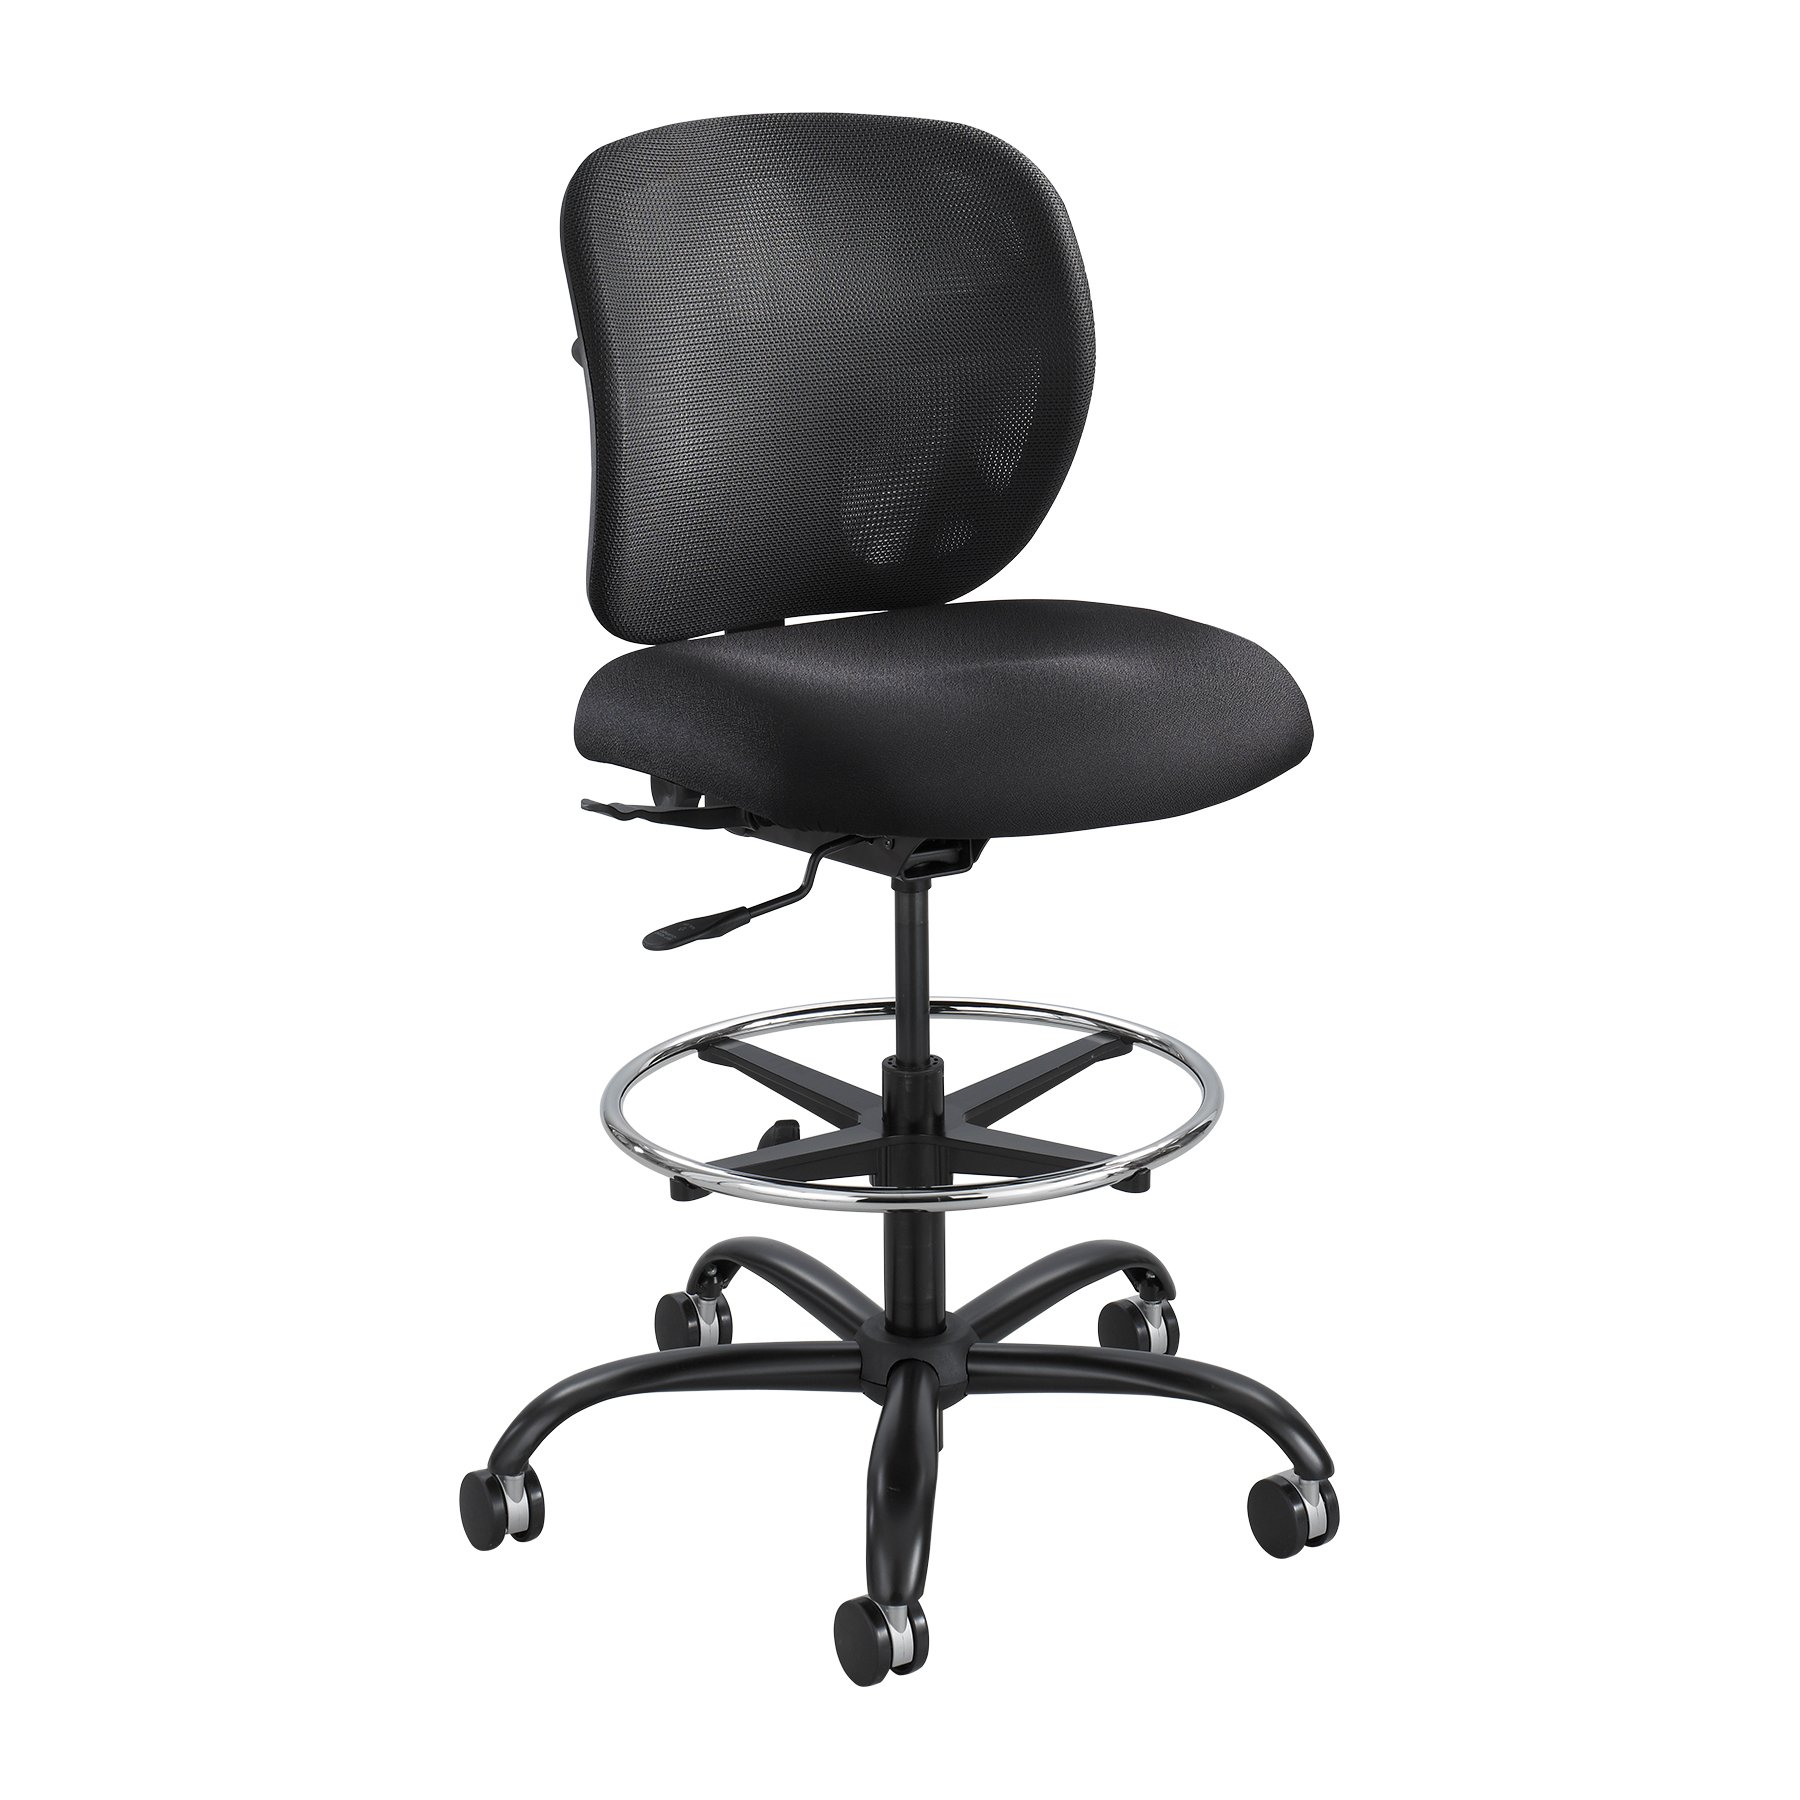 Safco Vue Heavy Duty Stool 3394BV, Black Vinyl, Rated for 24/7 Use, Holds up to 350 lbs. (SAF3394BV)